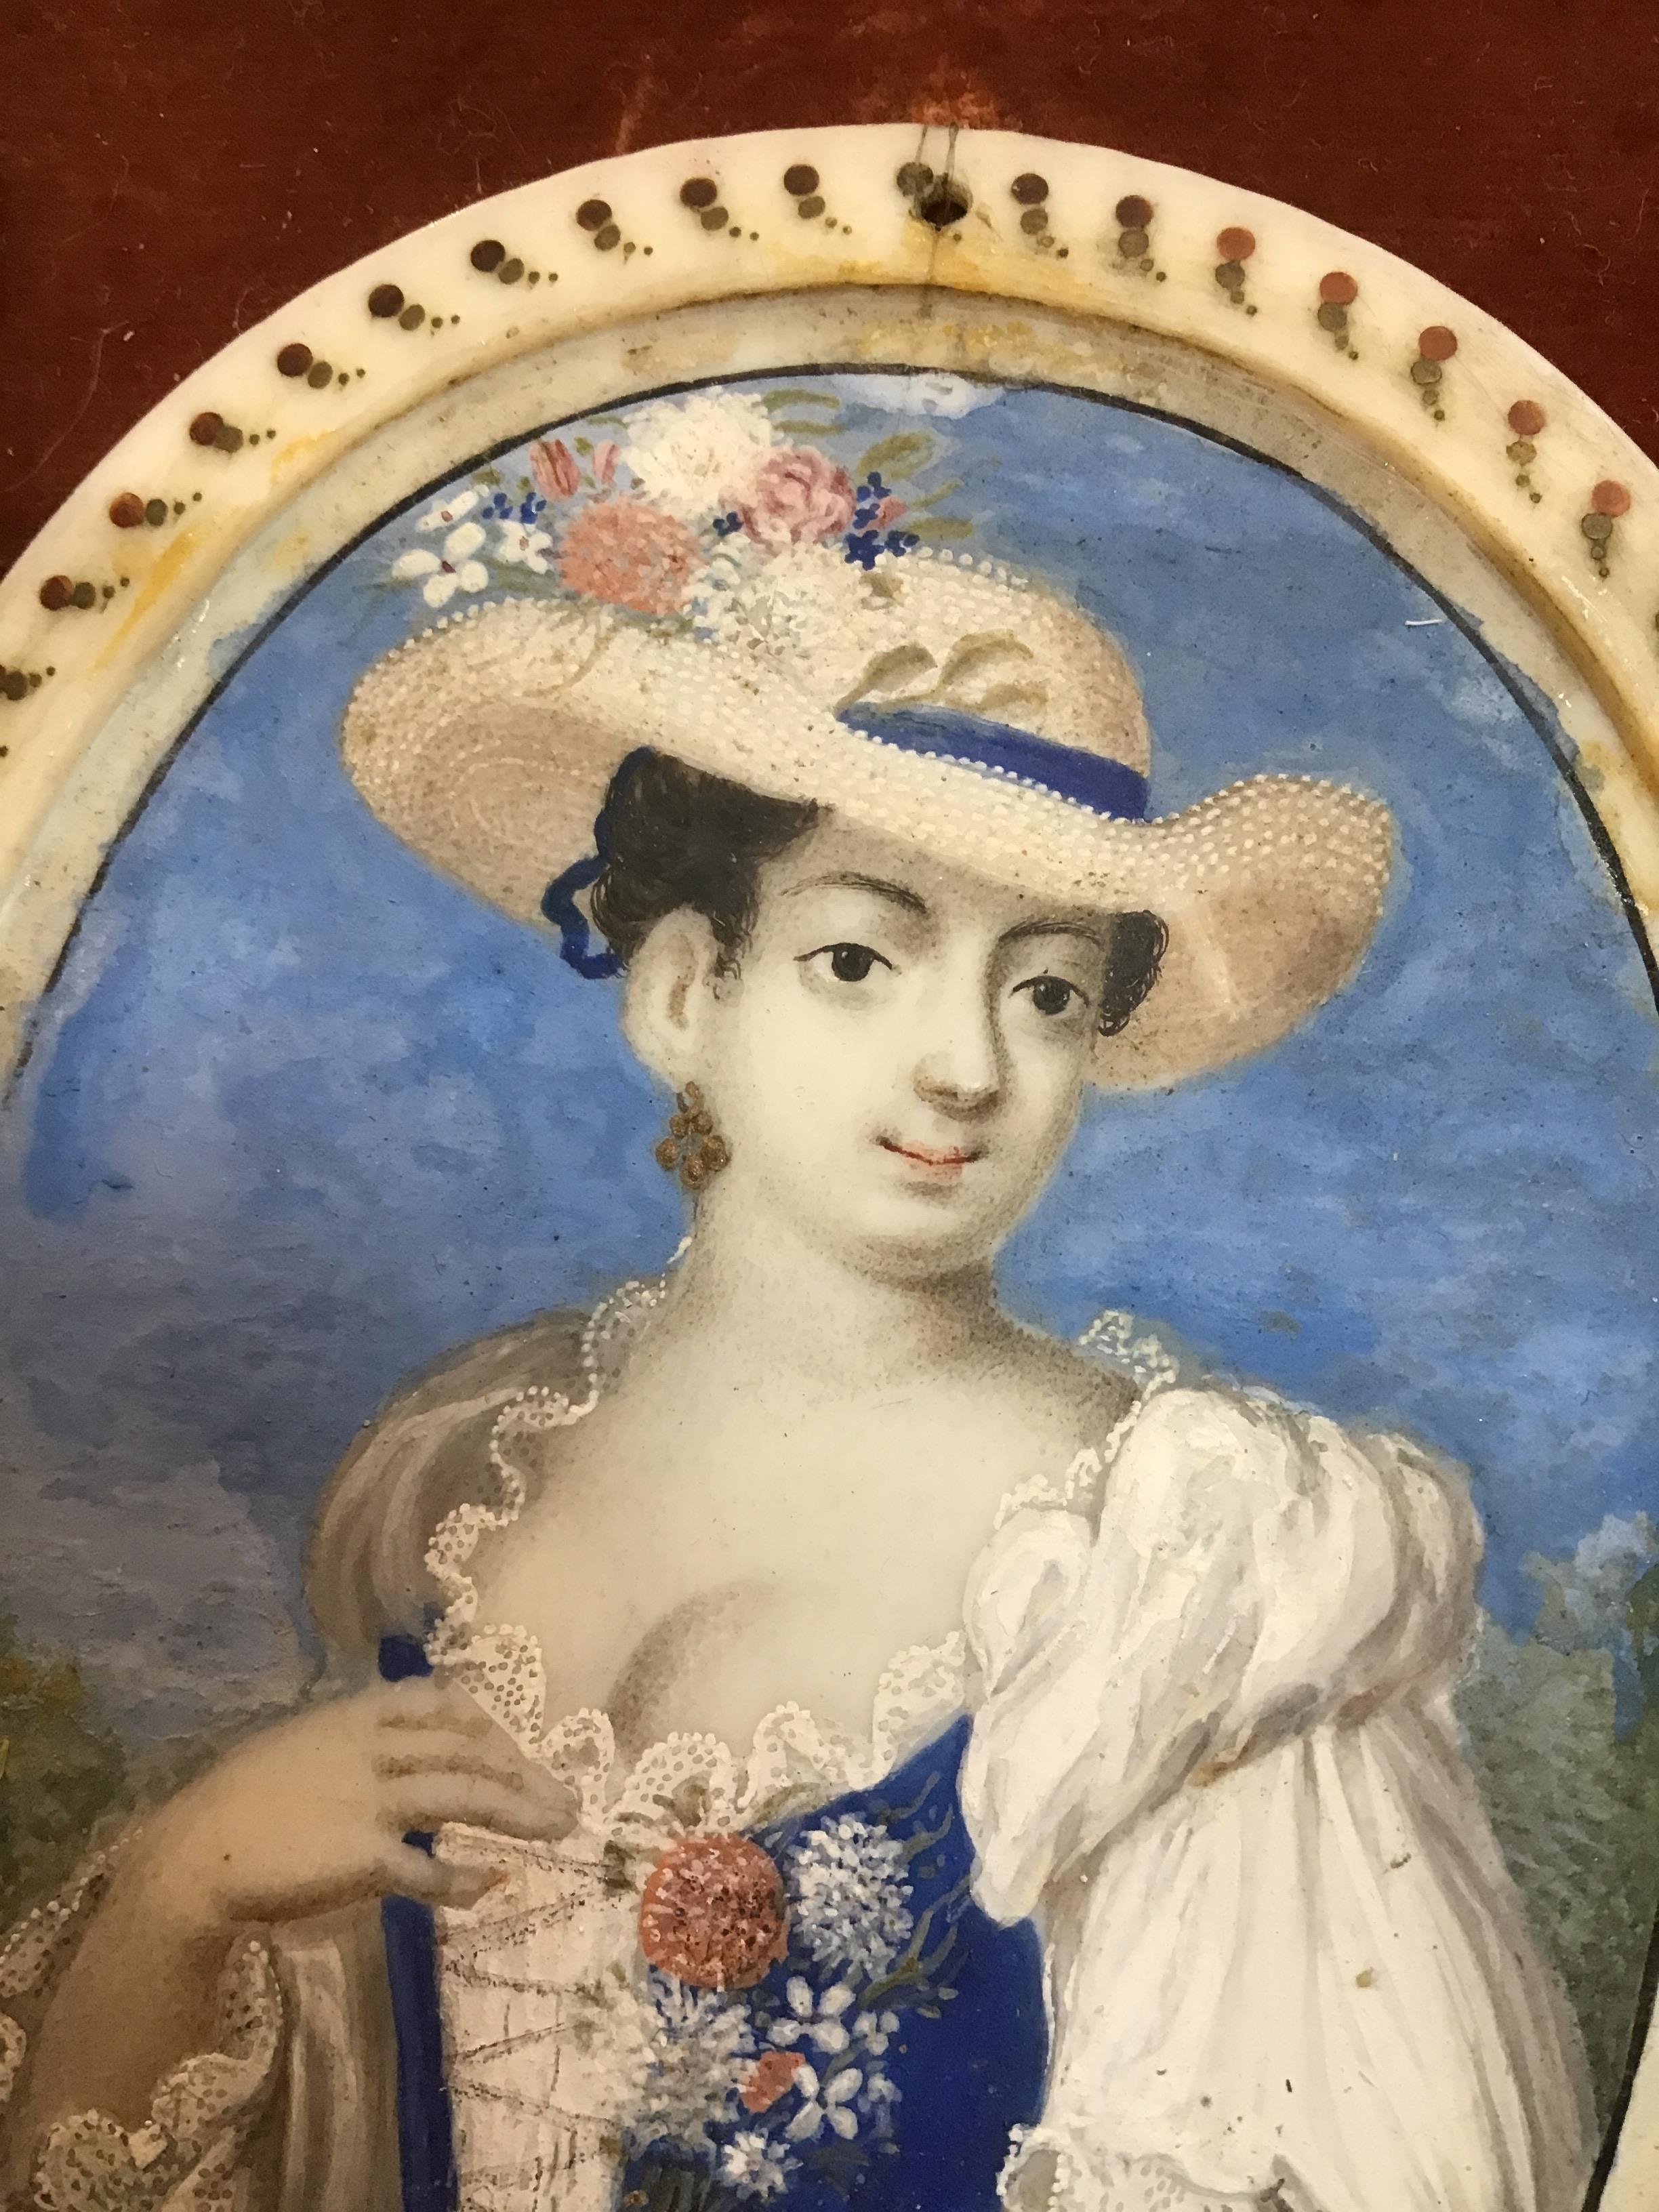 Follower of Rosalba Carriera (1673-1757) miniature portrait of a girl in a blue dress, painted on - Image 12 of 32